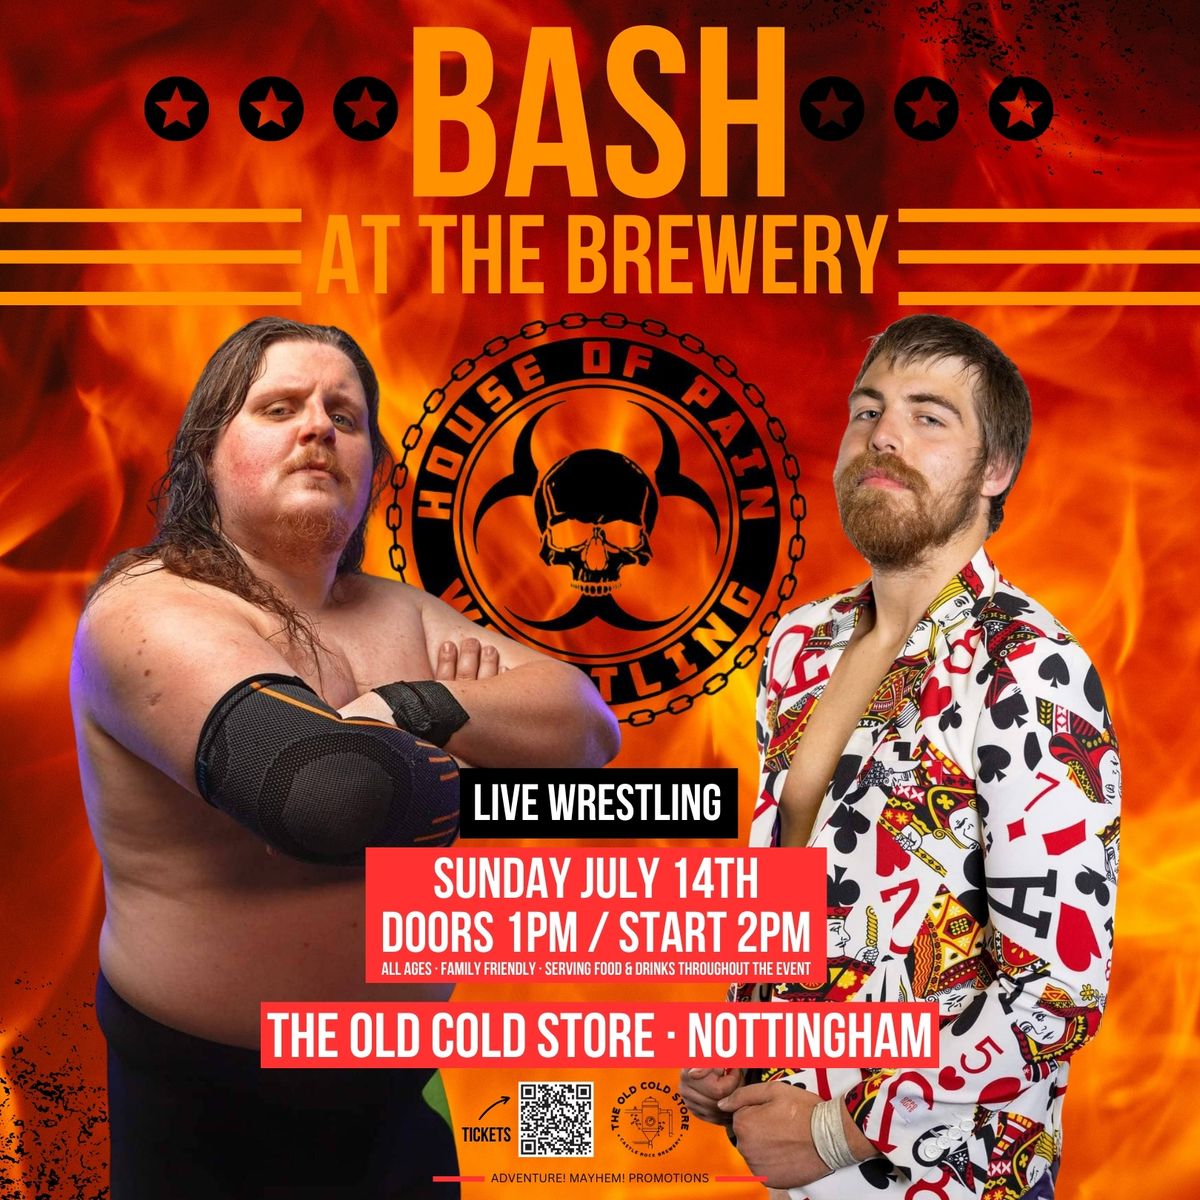 House Of Pain Wrestling: Bash at the Brewery